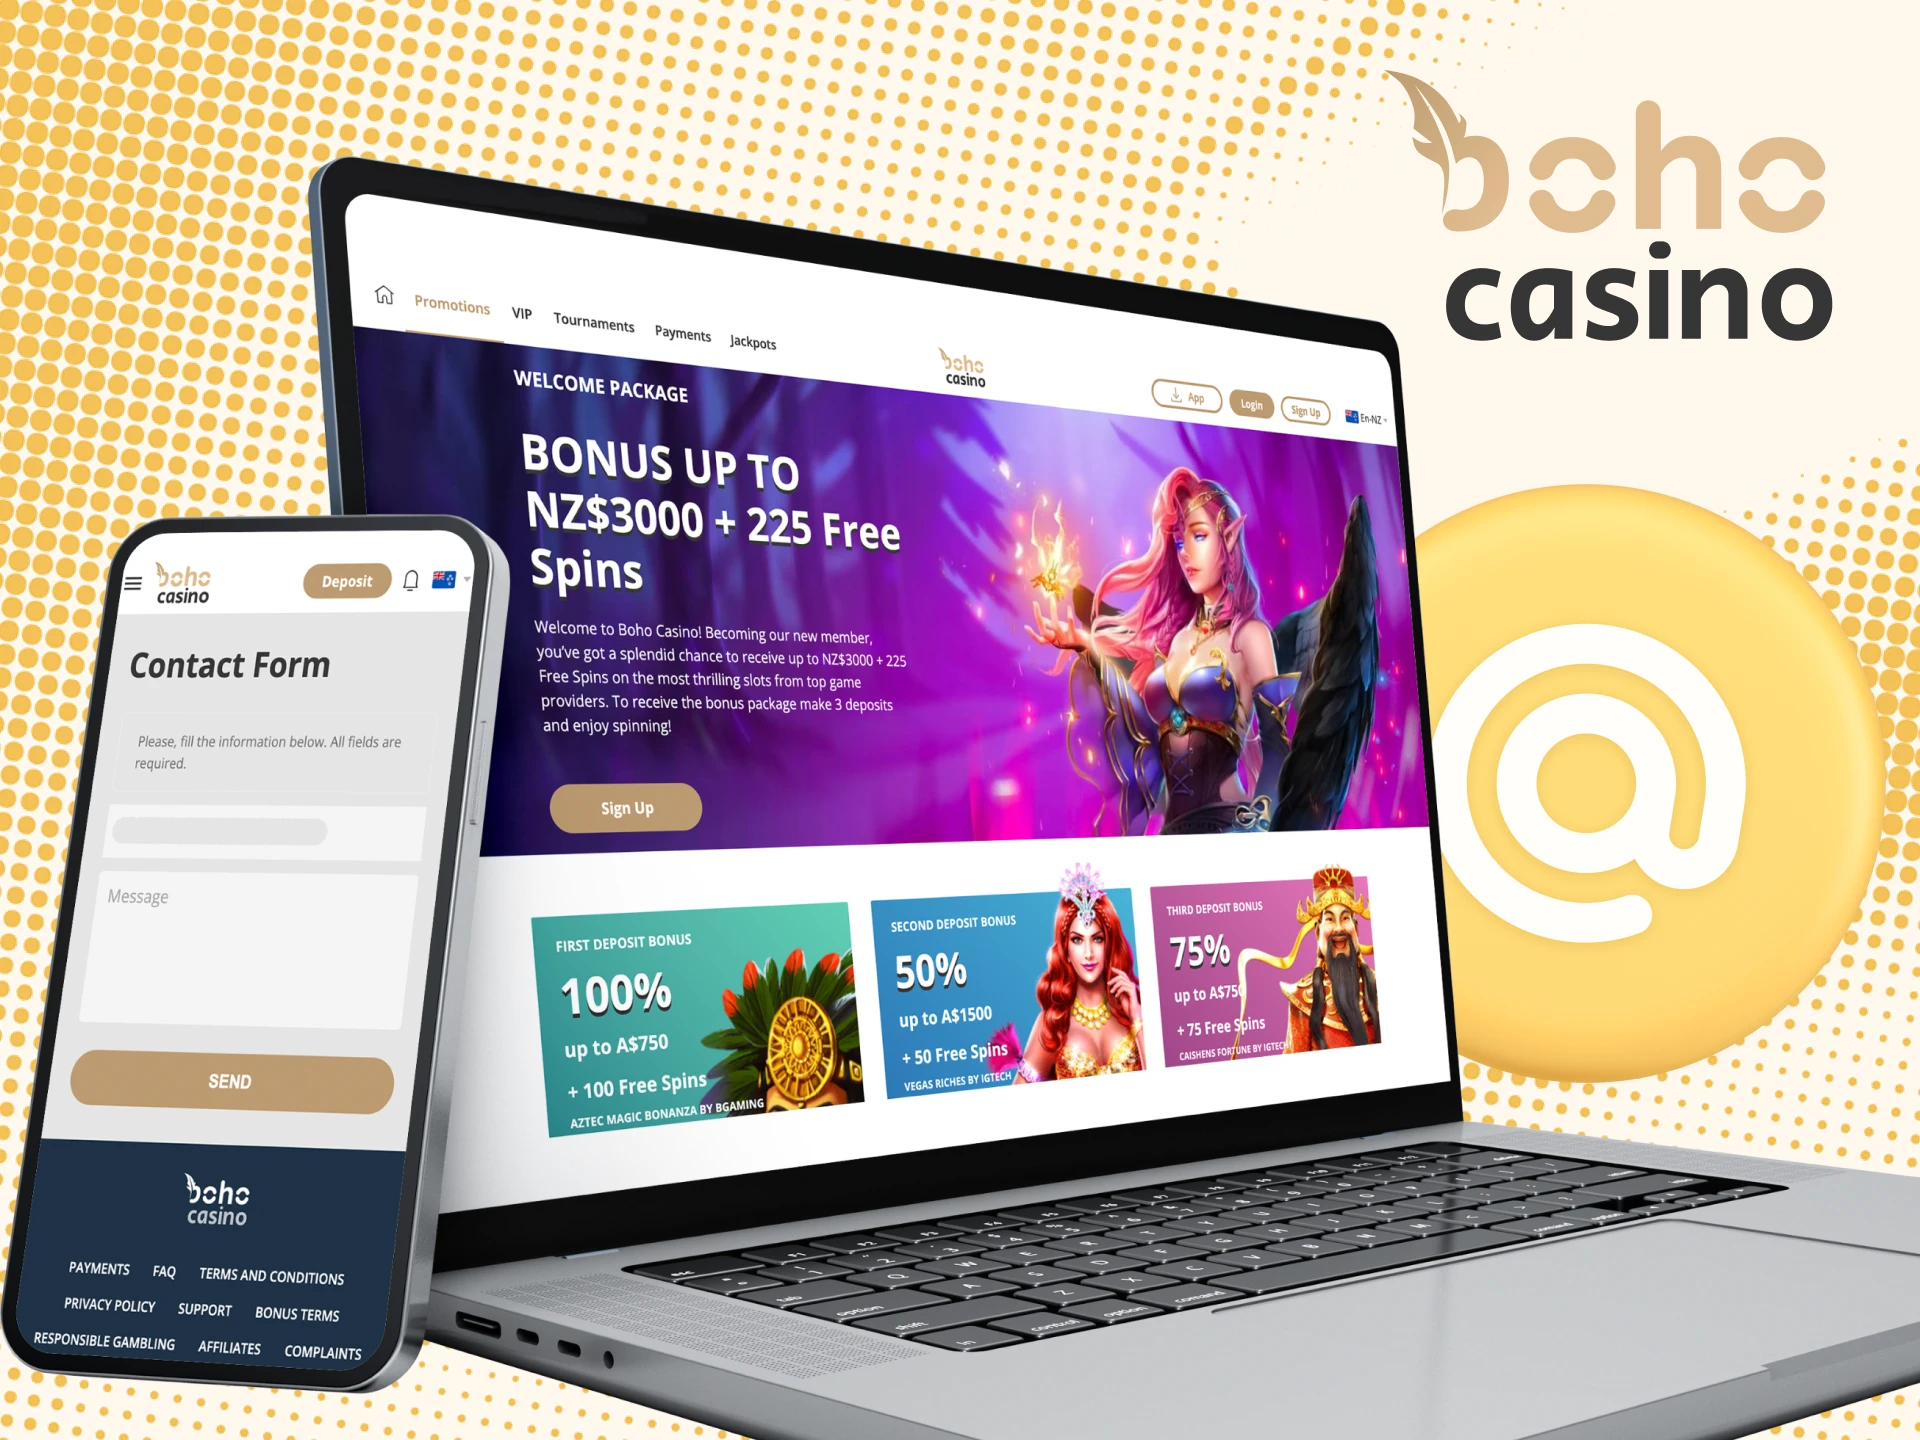 What is the email address for the technical support service on the Boho online casino website.